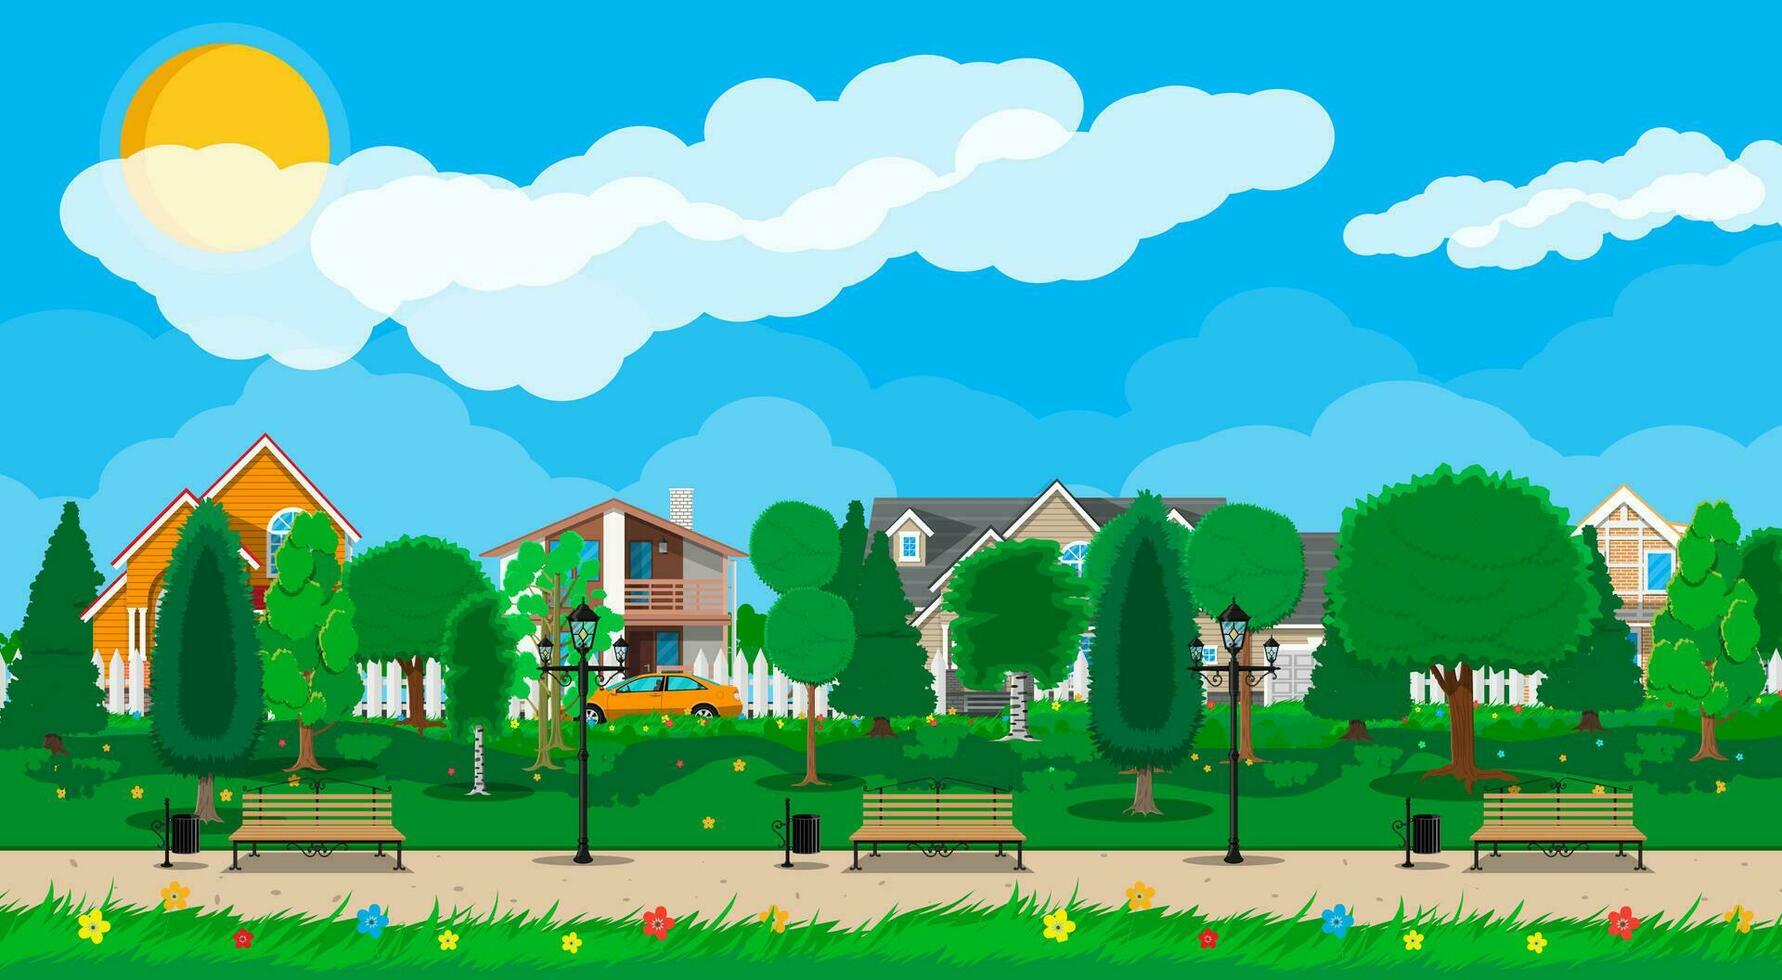 Suburb concept, wooden bench, street lamp, waste bin in square. Cityscape with buildings and trees. Sky with clouds and sun. Leisure time in summer city park. Vector illustration in flat style